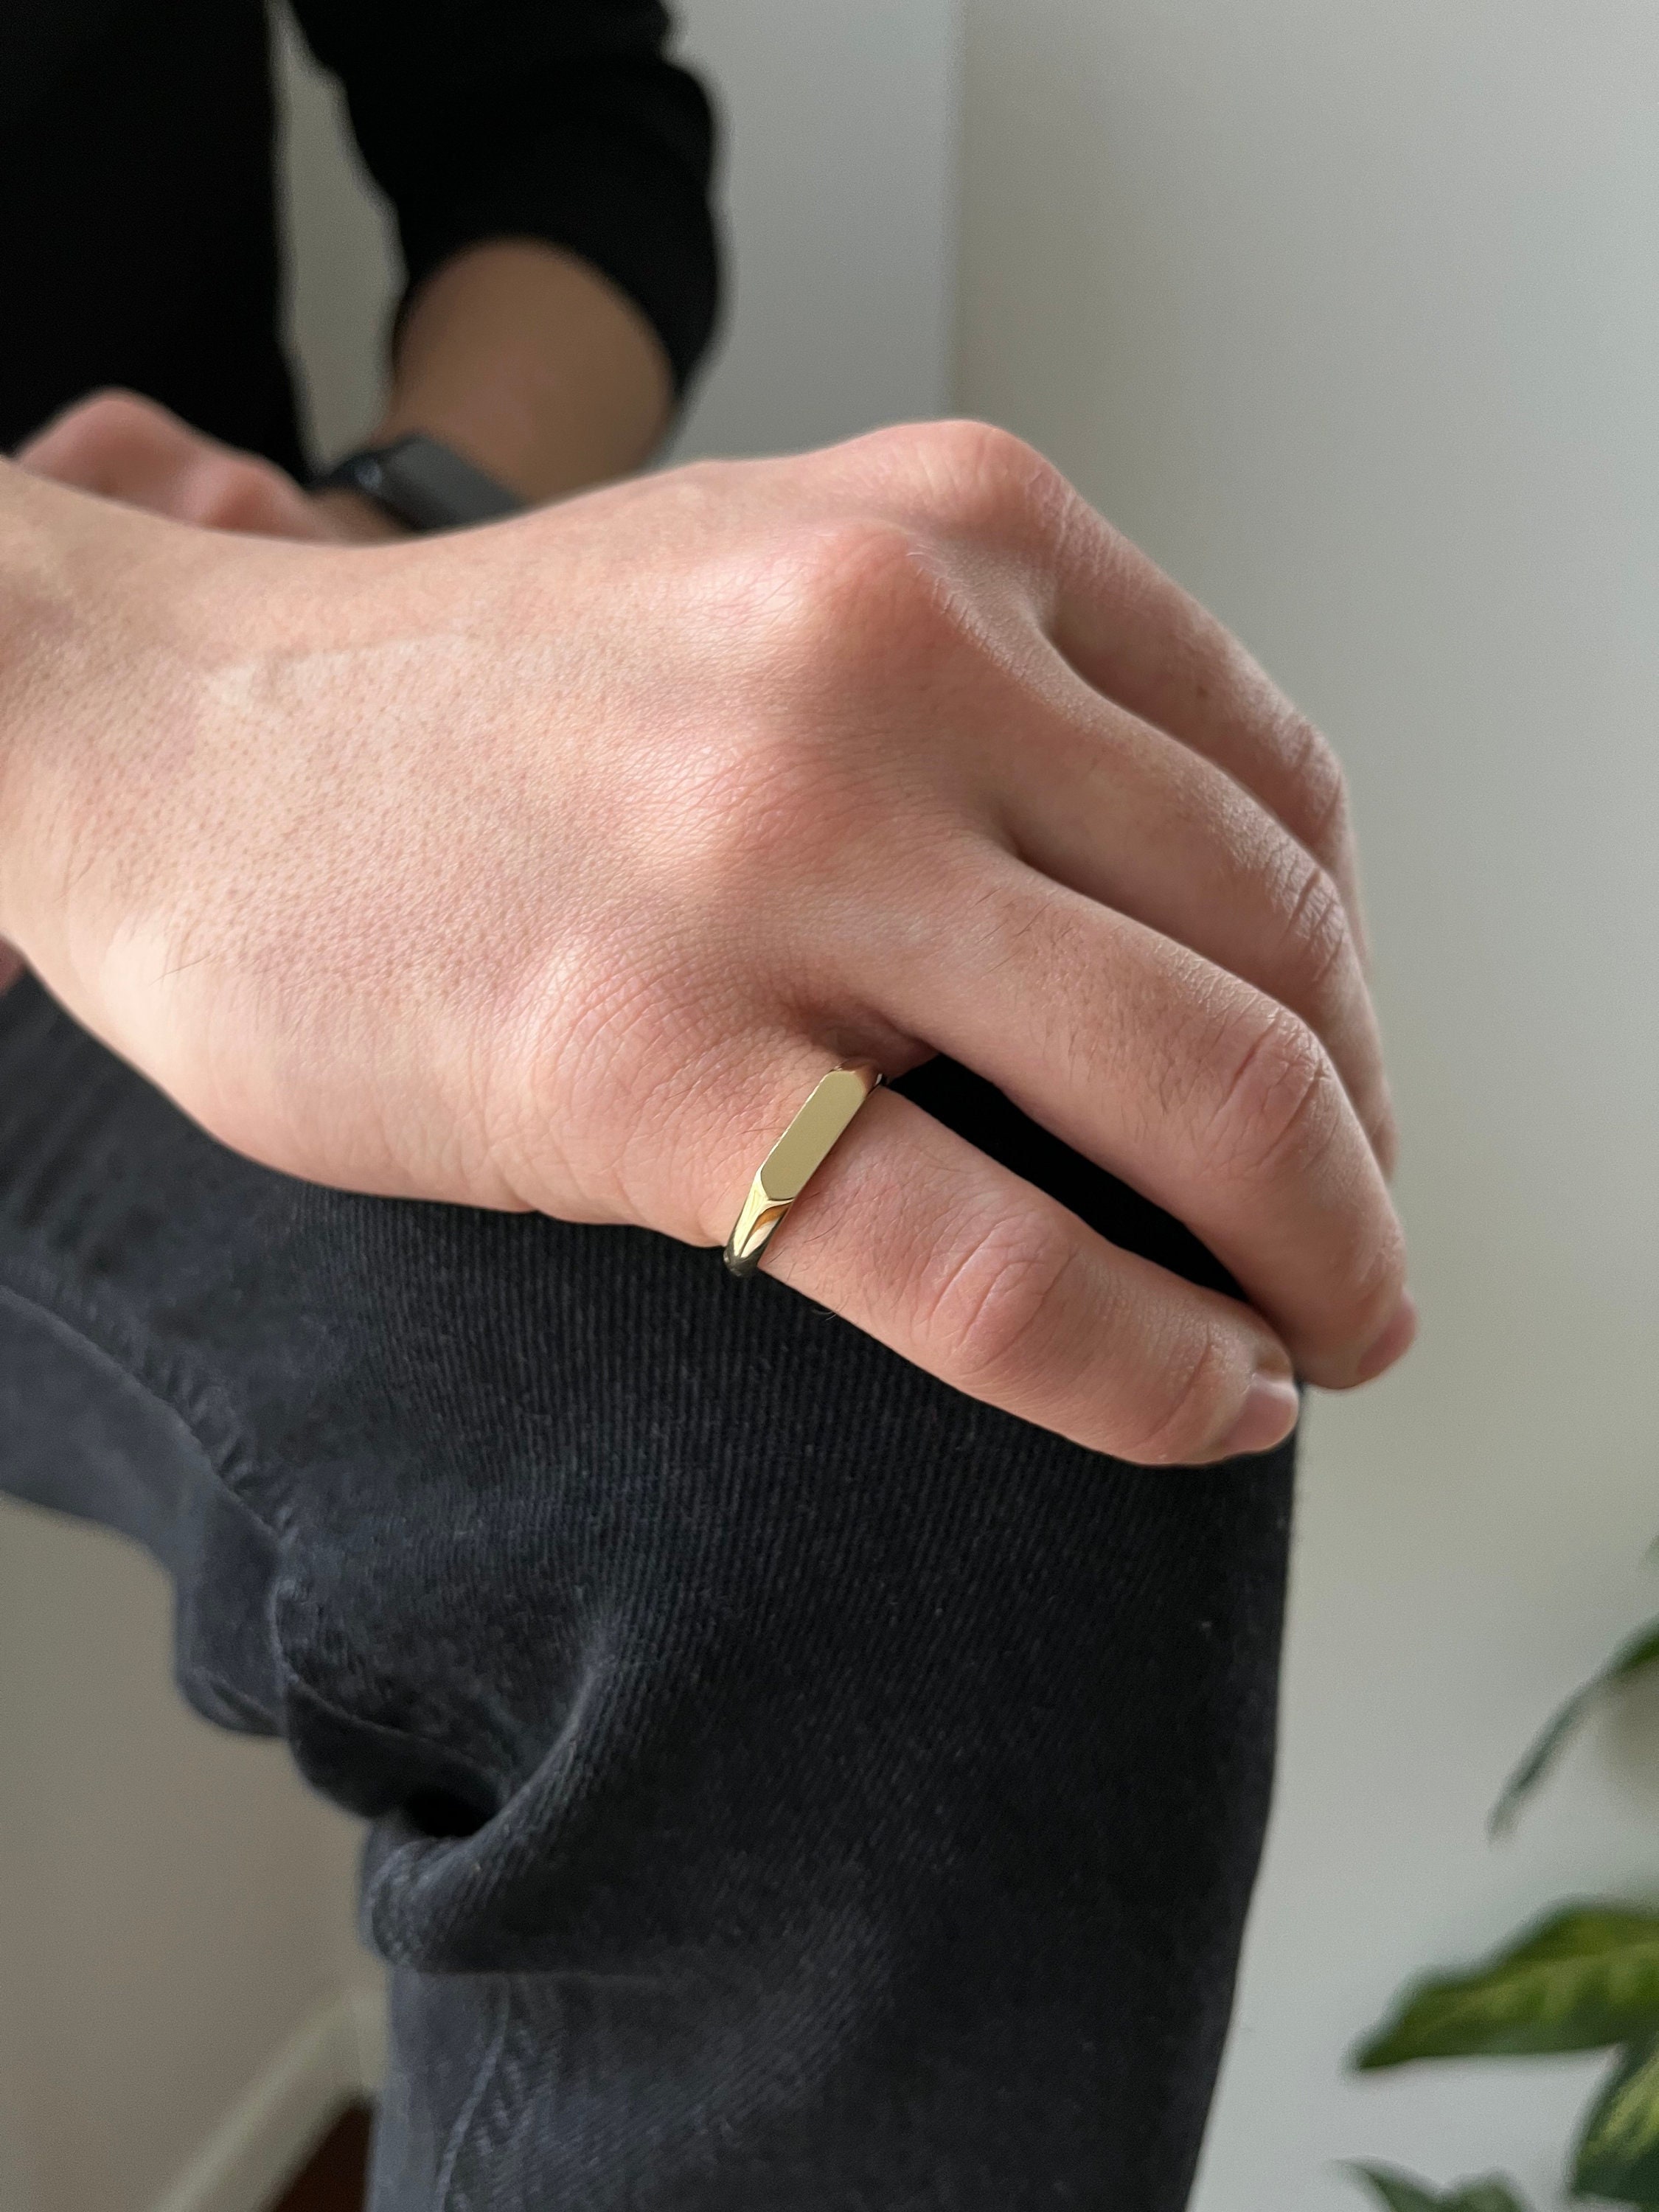 Block Font Signet Ring with initials in Gold Black Fill Real Gold - Yellow 10K